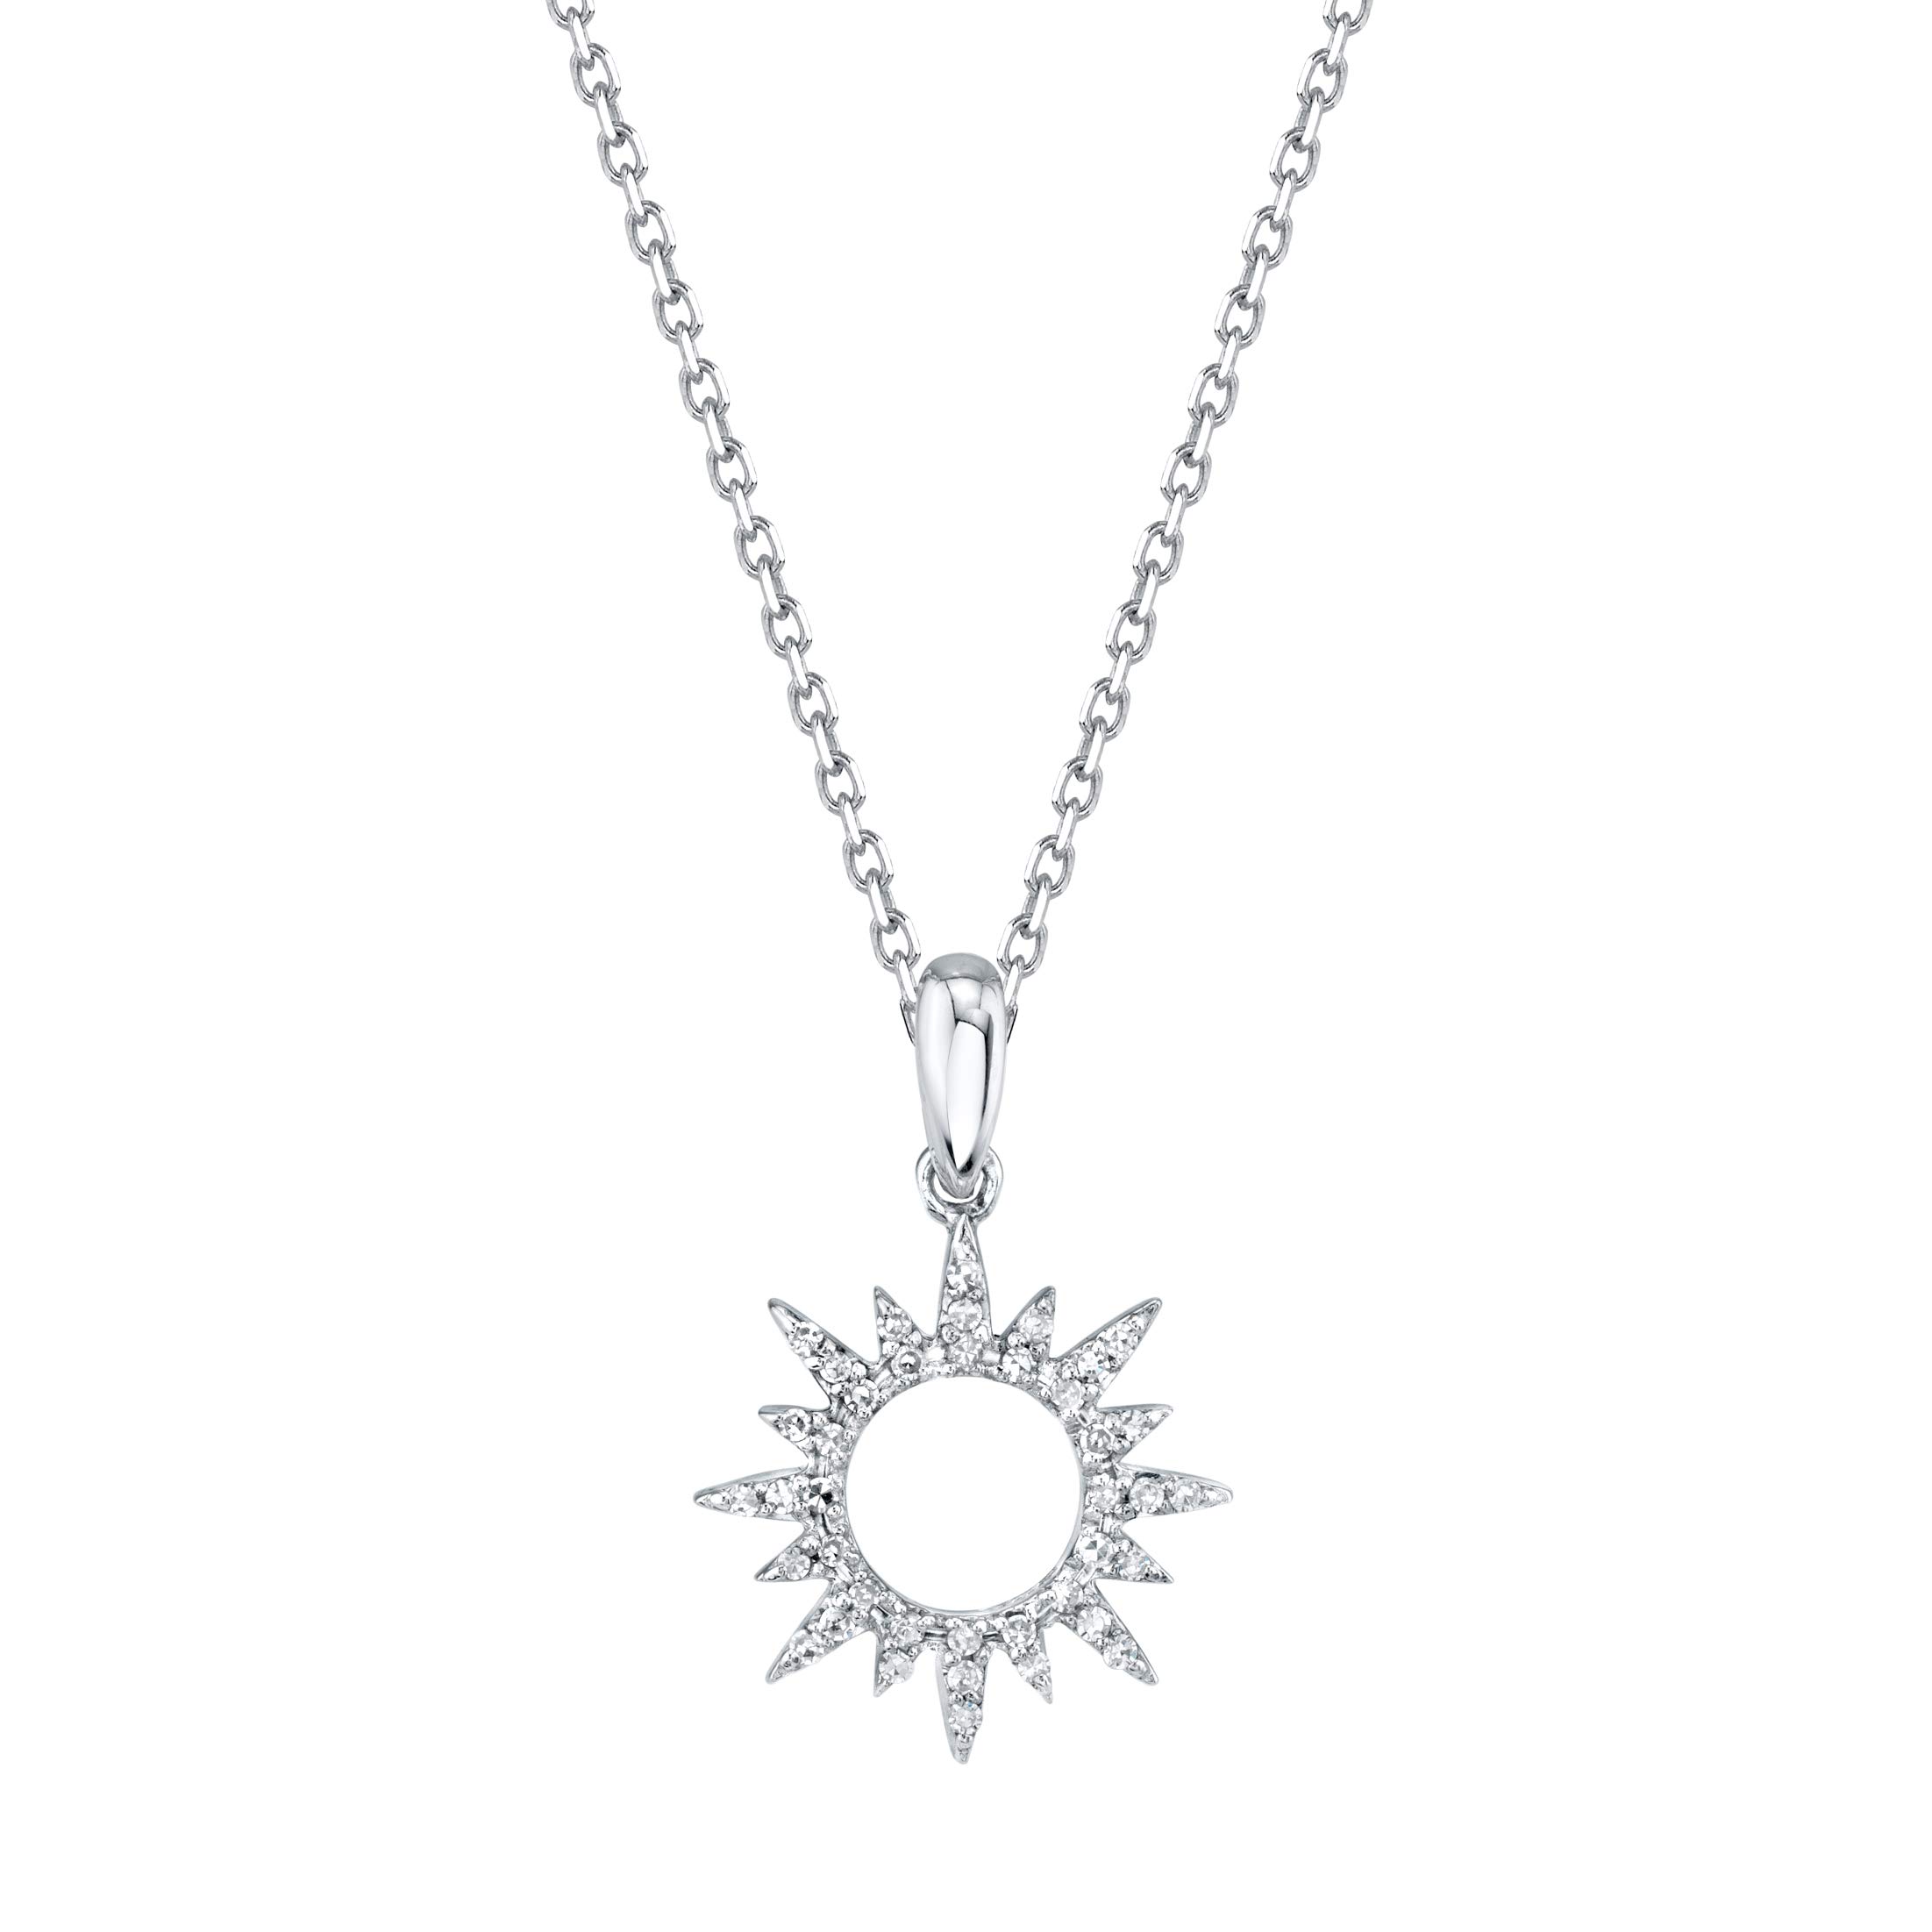 SERAFINA Diamond Charm Pendant Necklace Little Treasures | 925 Sterling Silver Name Necklace with Natural Diamonds | 16